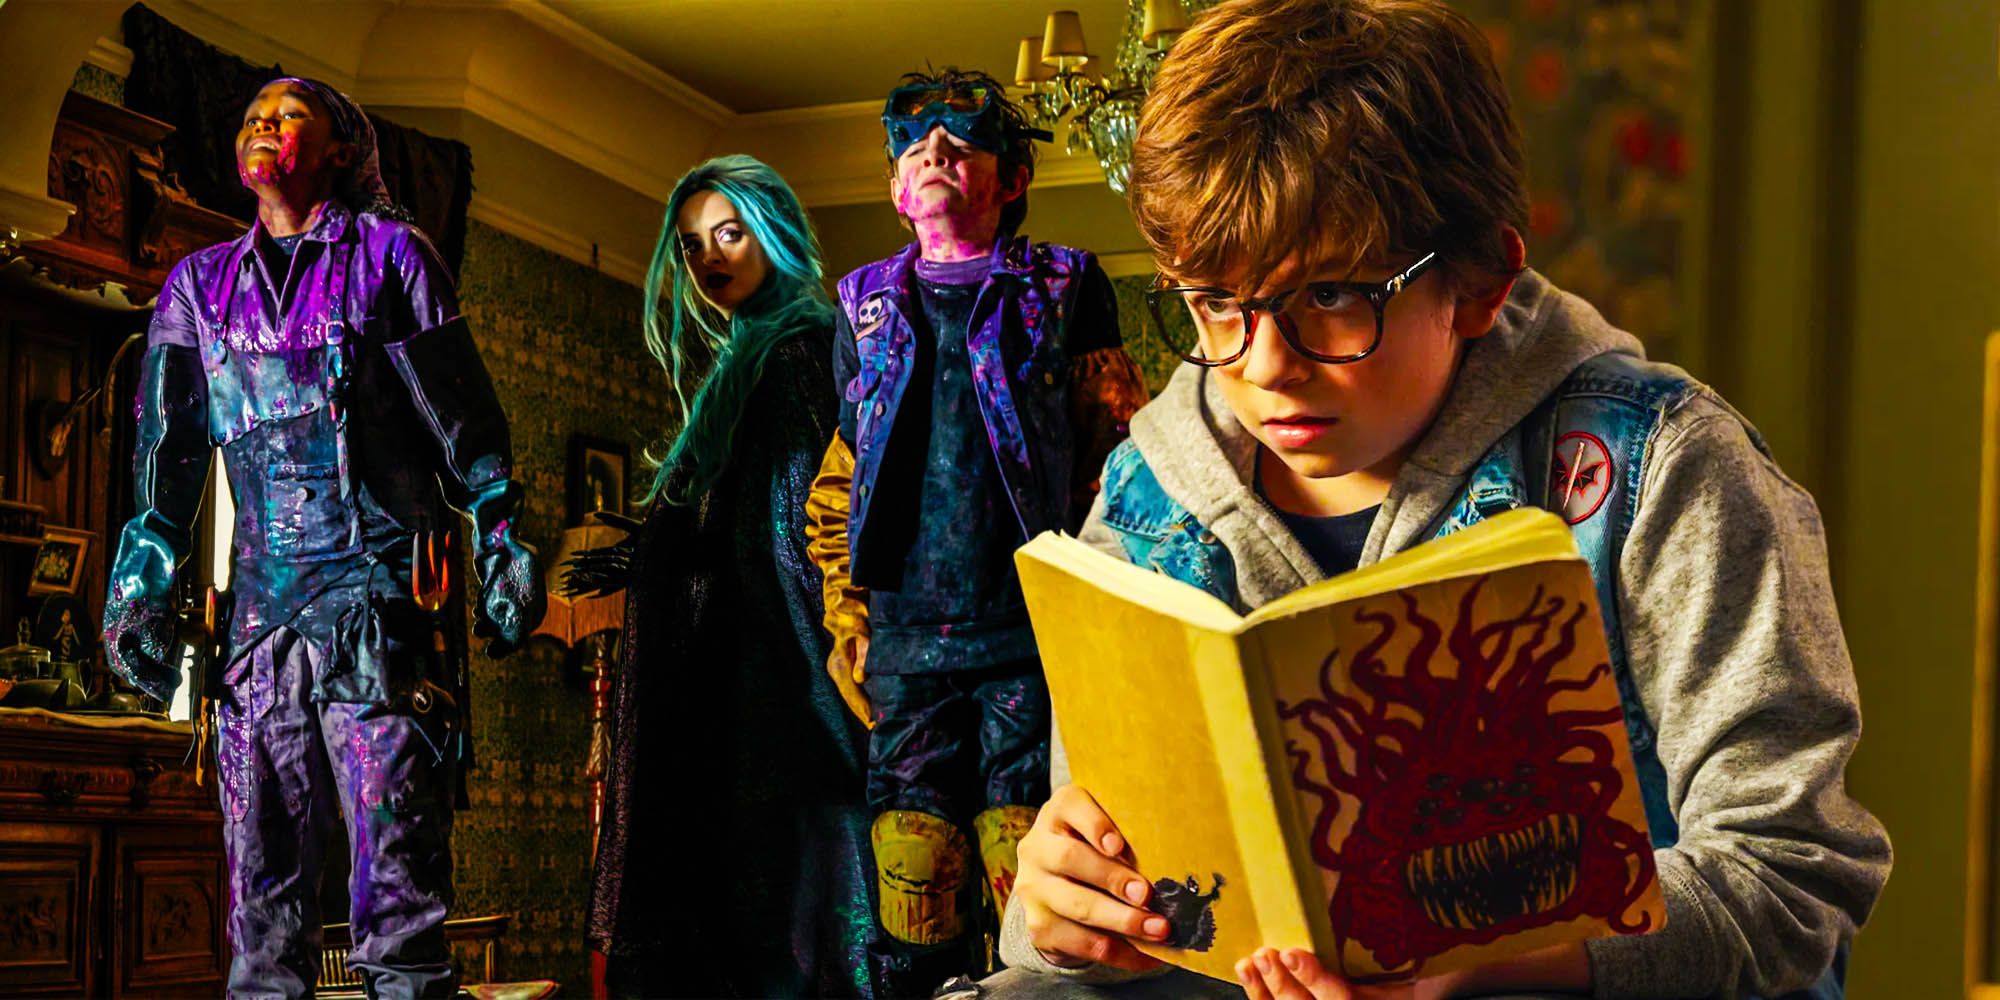 Blended image showing the characters from Nightbooks